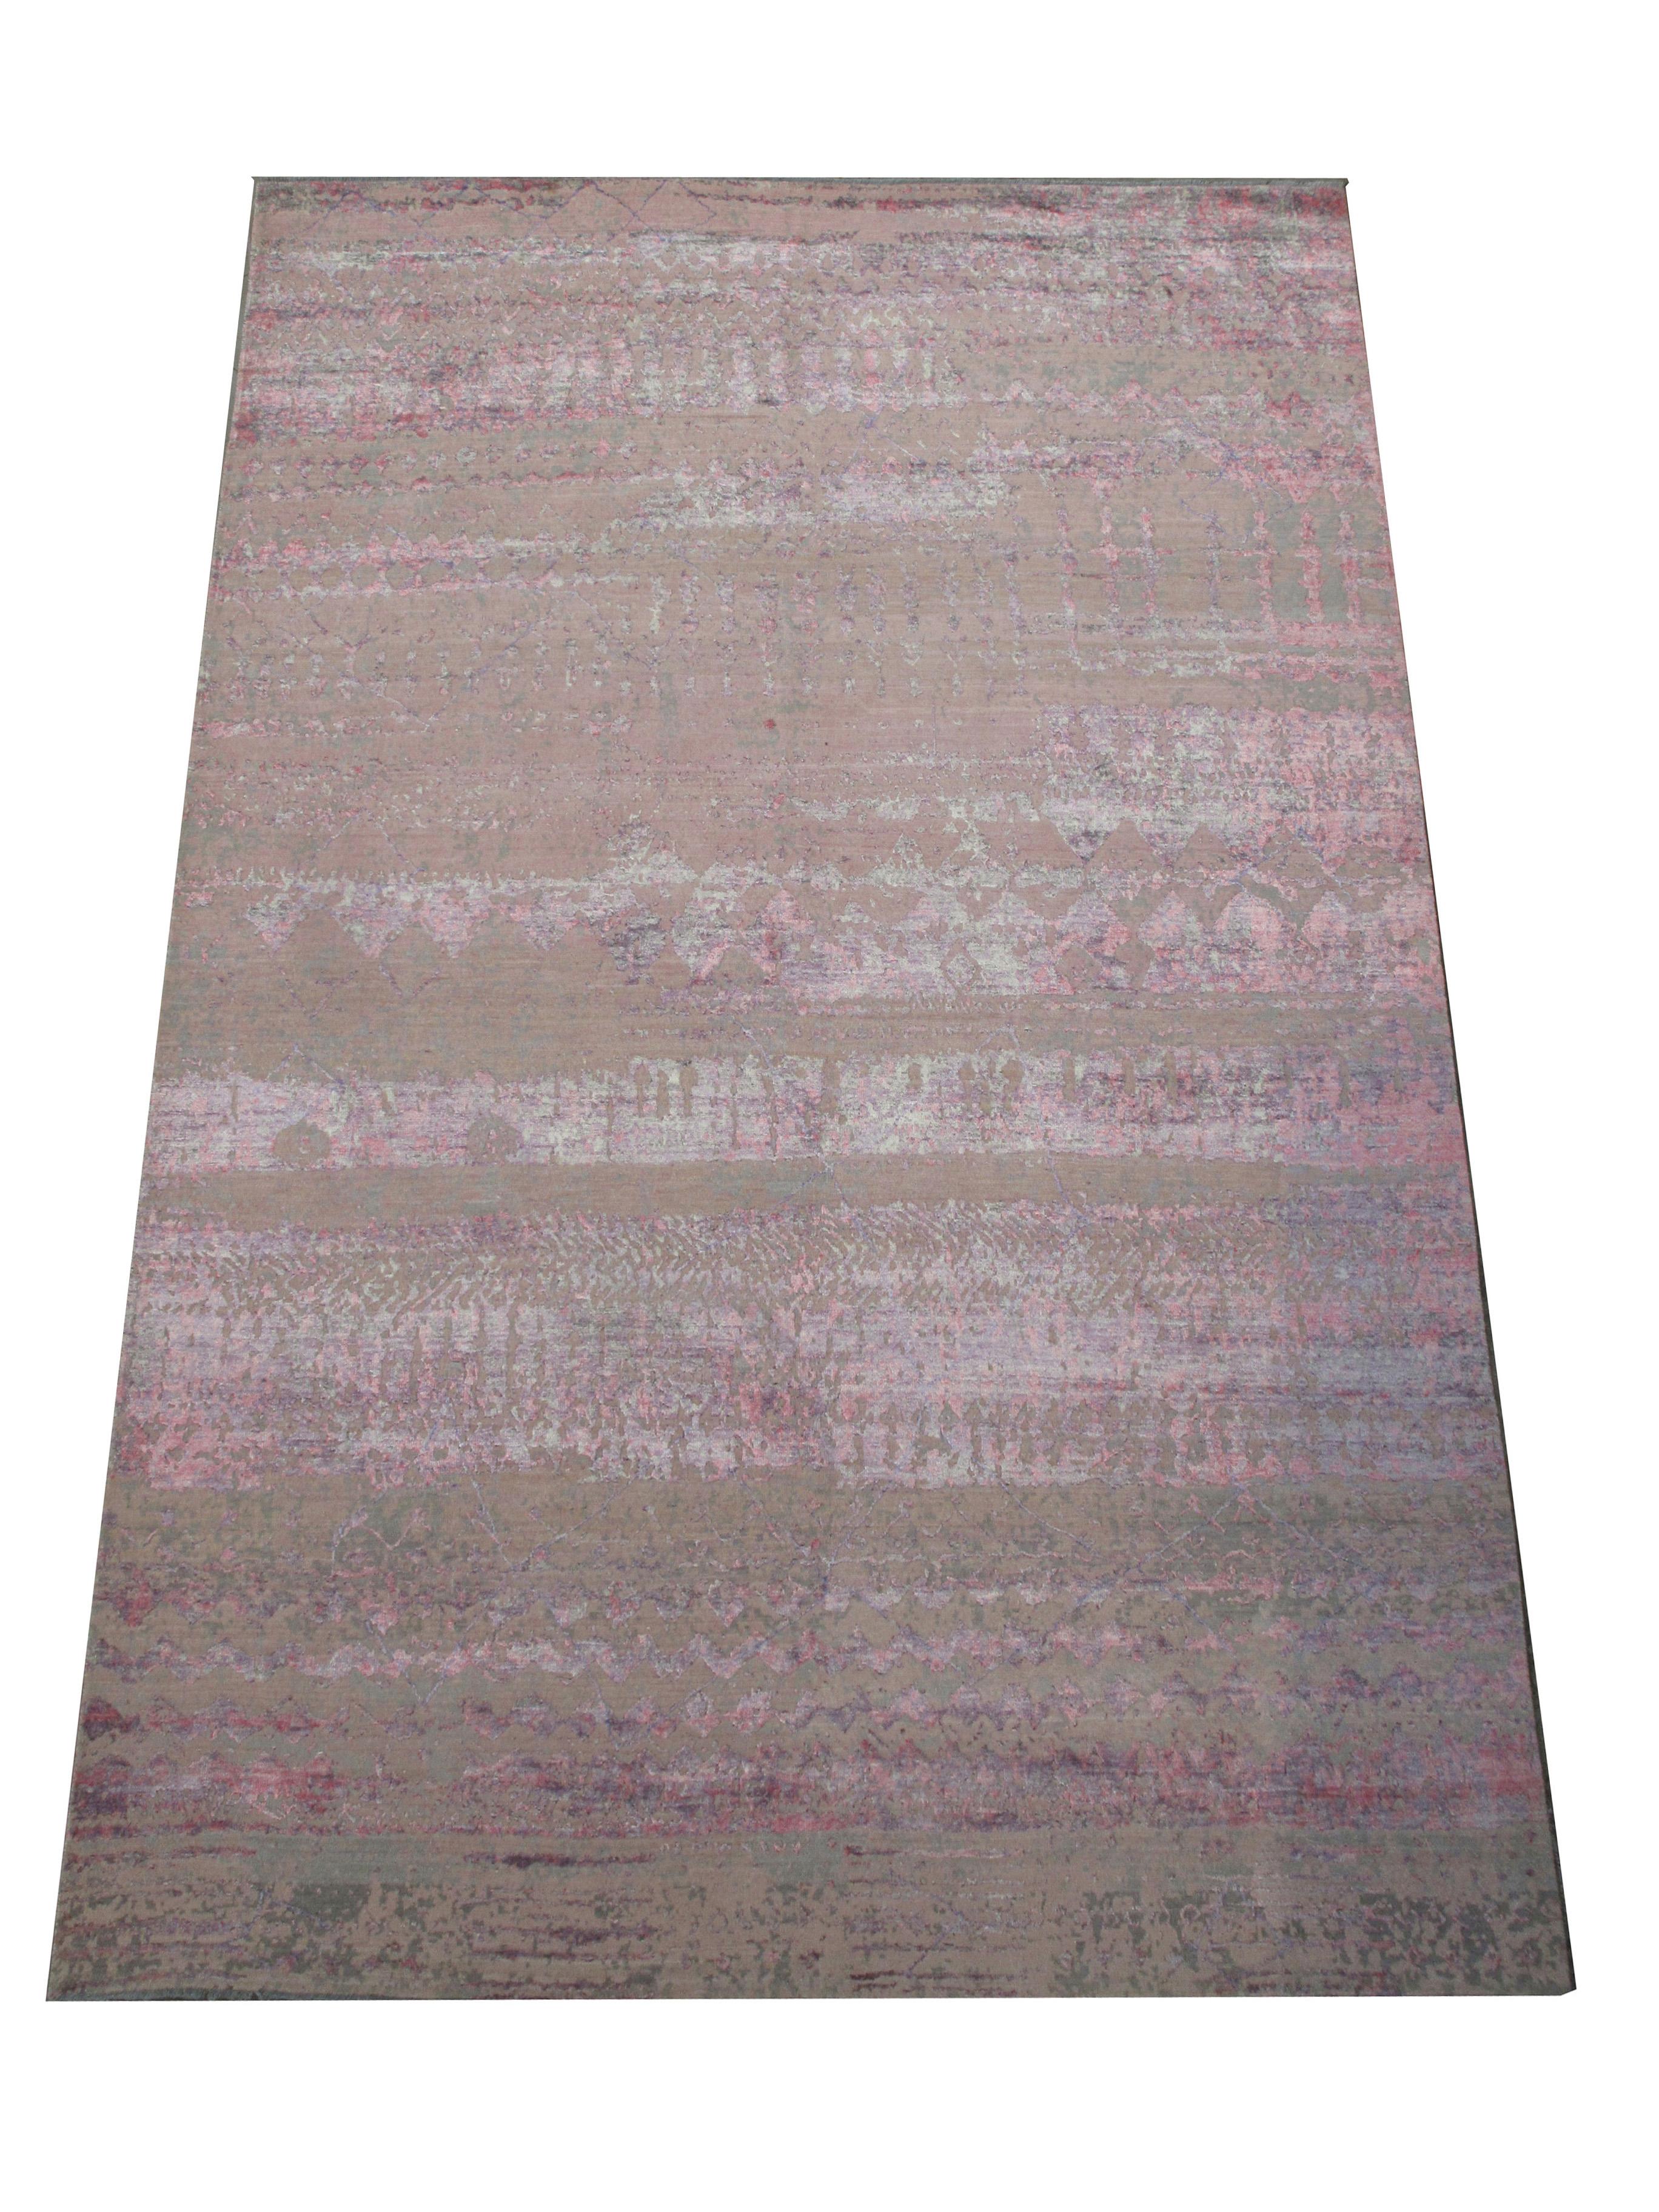 Hand knotted wool & silk pile on a cotton foundation. 

Oxidized design.

Dimensions: 8' x 10'2